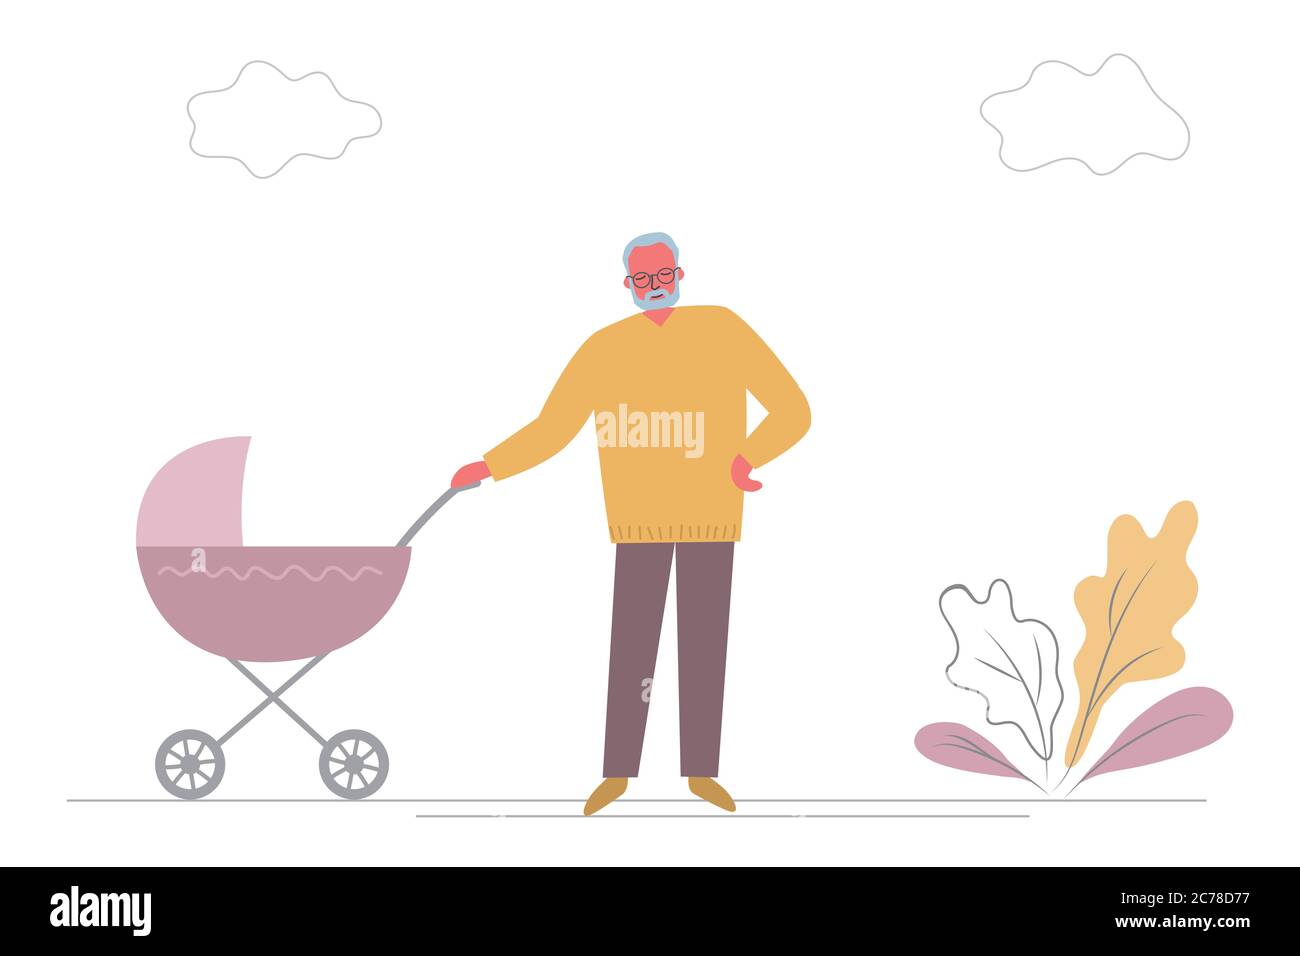 Grandfather  with grandchild in baby stroller. Old man with a purple pram on a walk. There is also plants and clouds in the picture. Funky flat style. Stock Vector